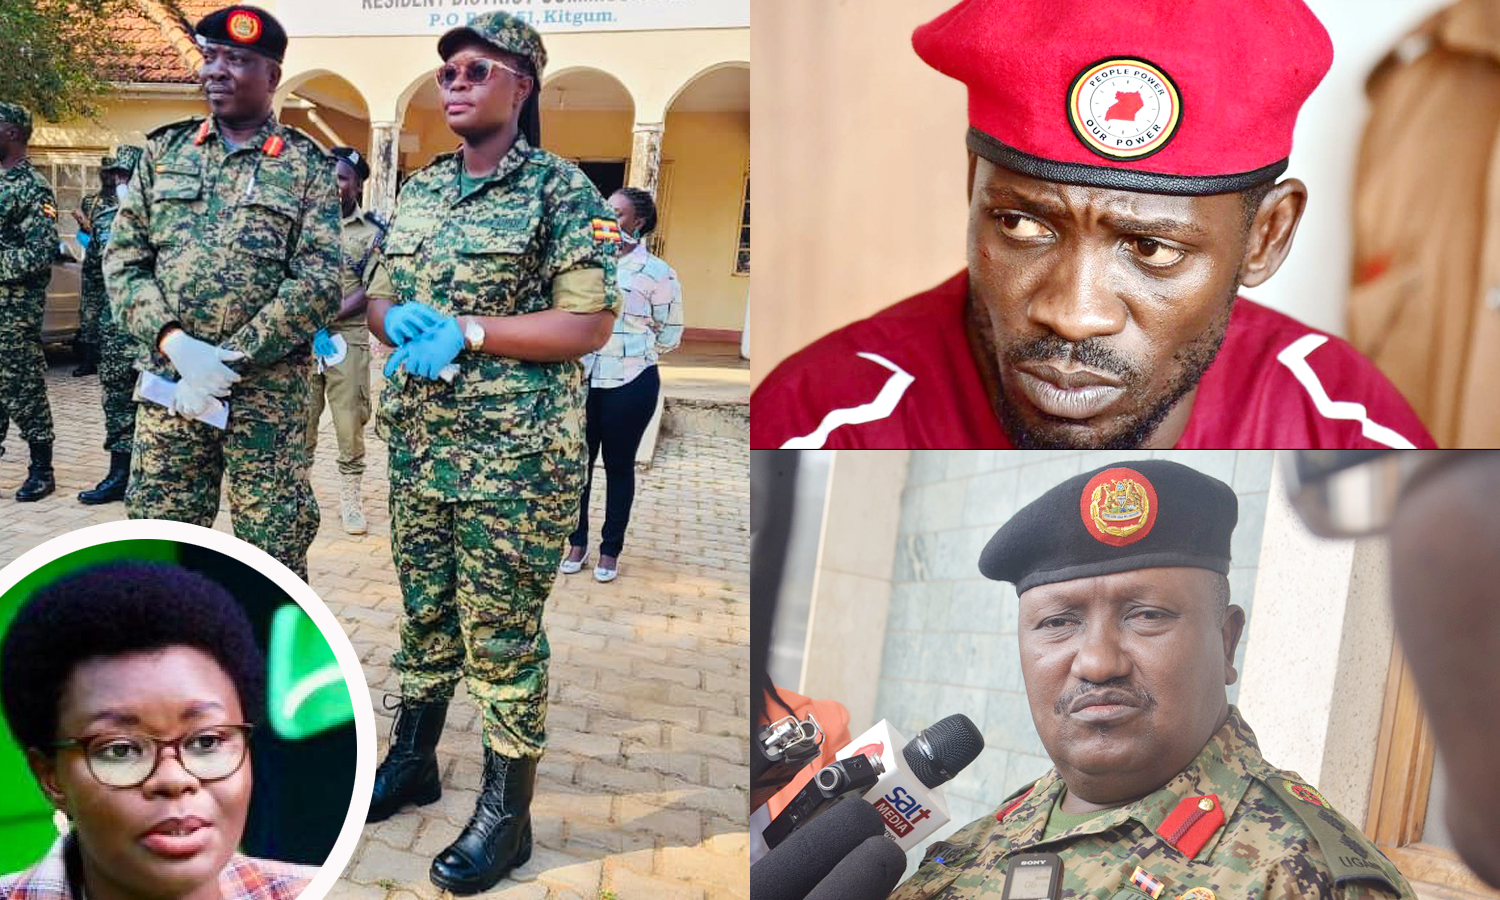 Bobi Wine decries persecution of NUP supporters amidst concerns over MP's military attire